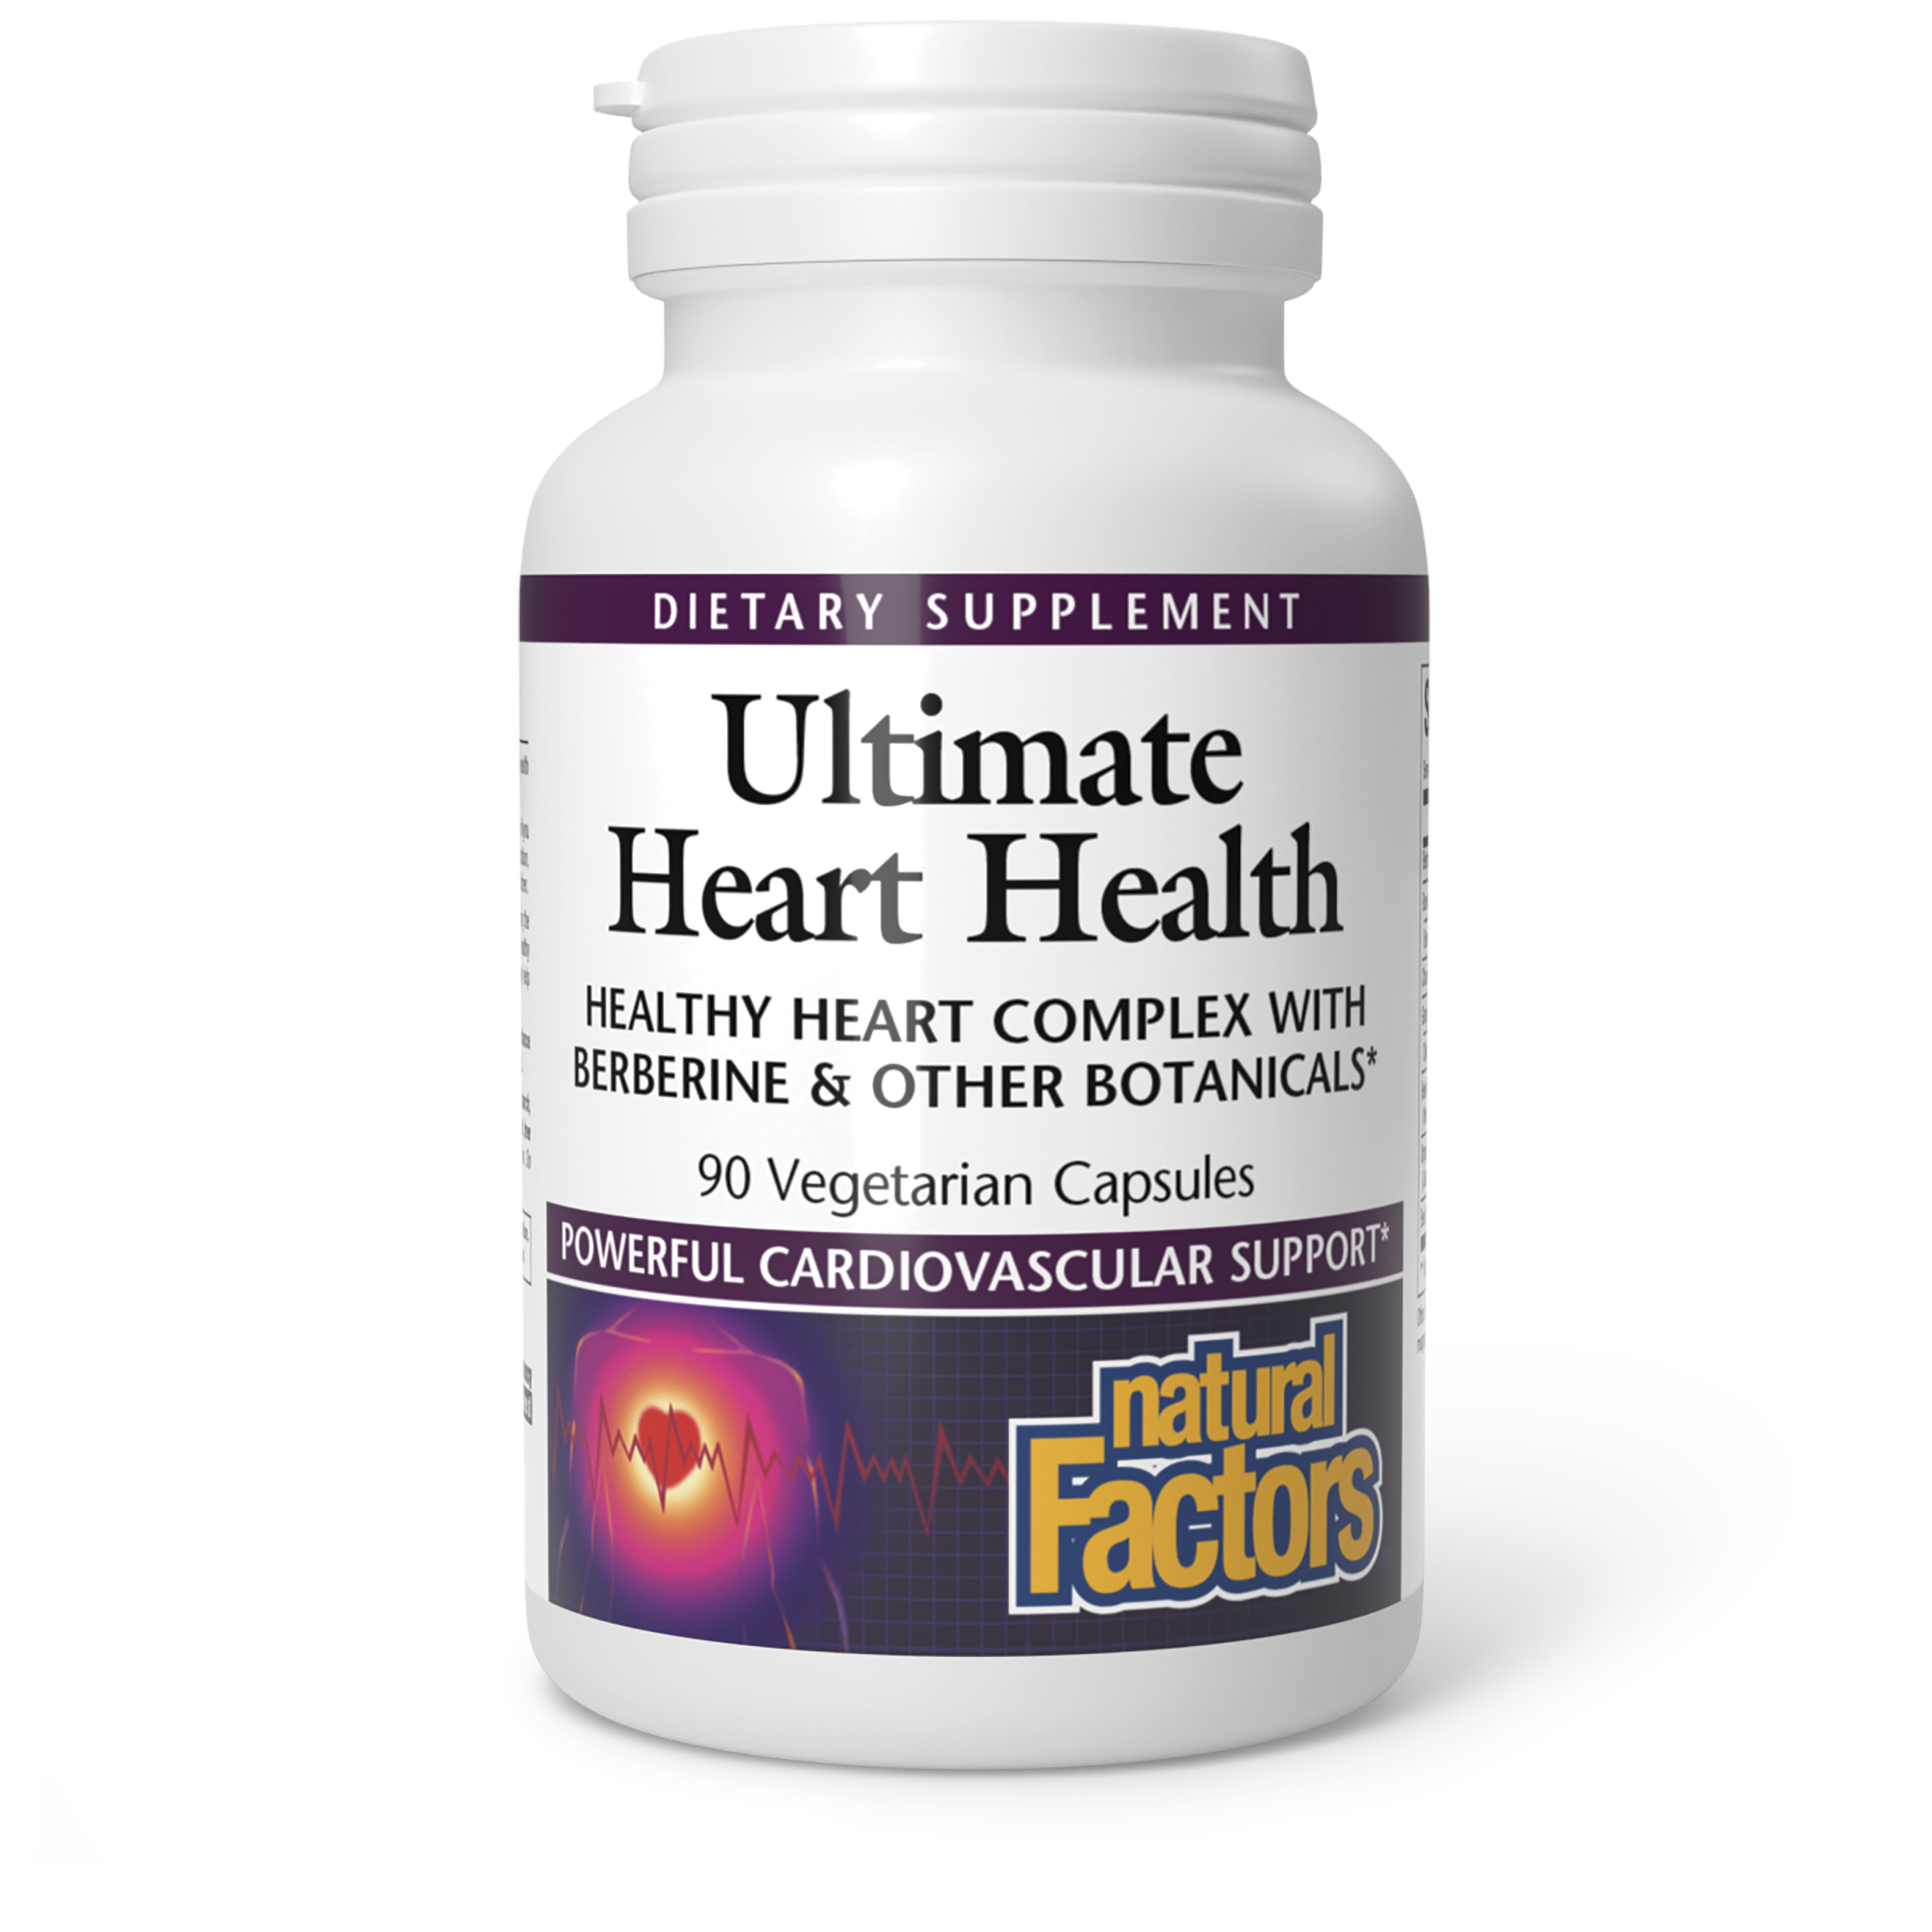 Heart health products